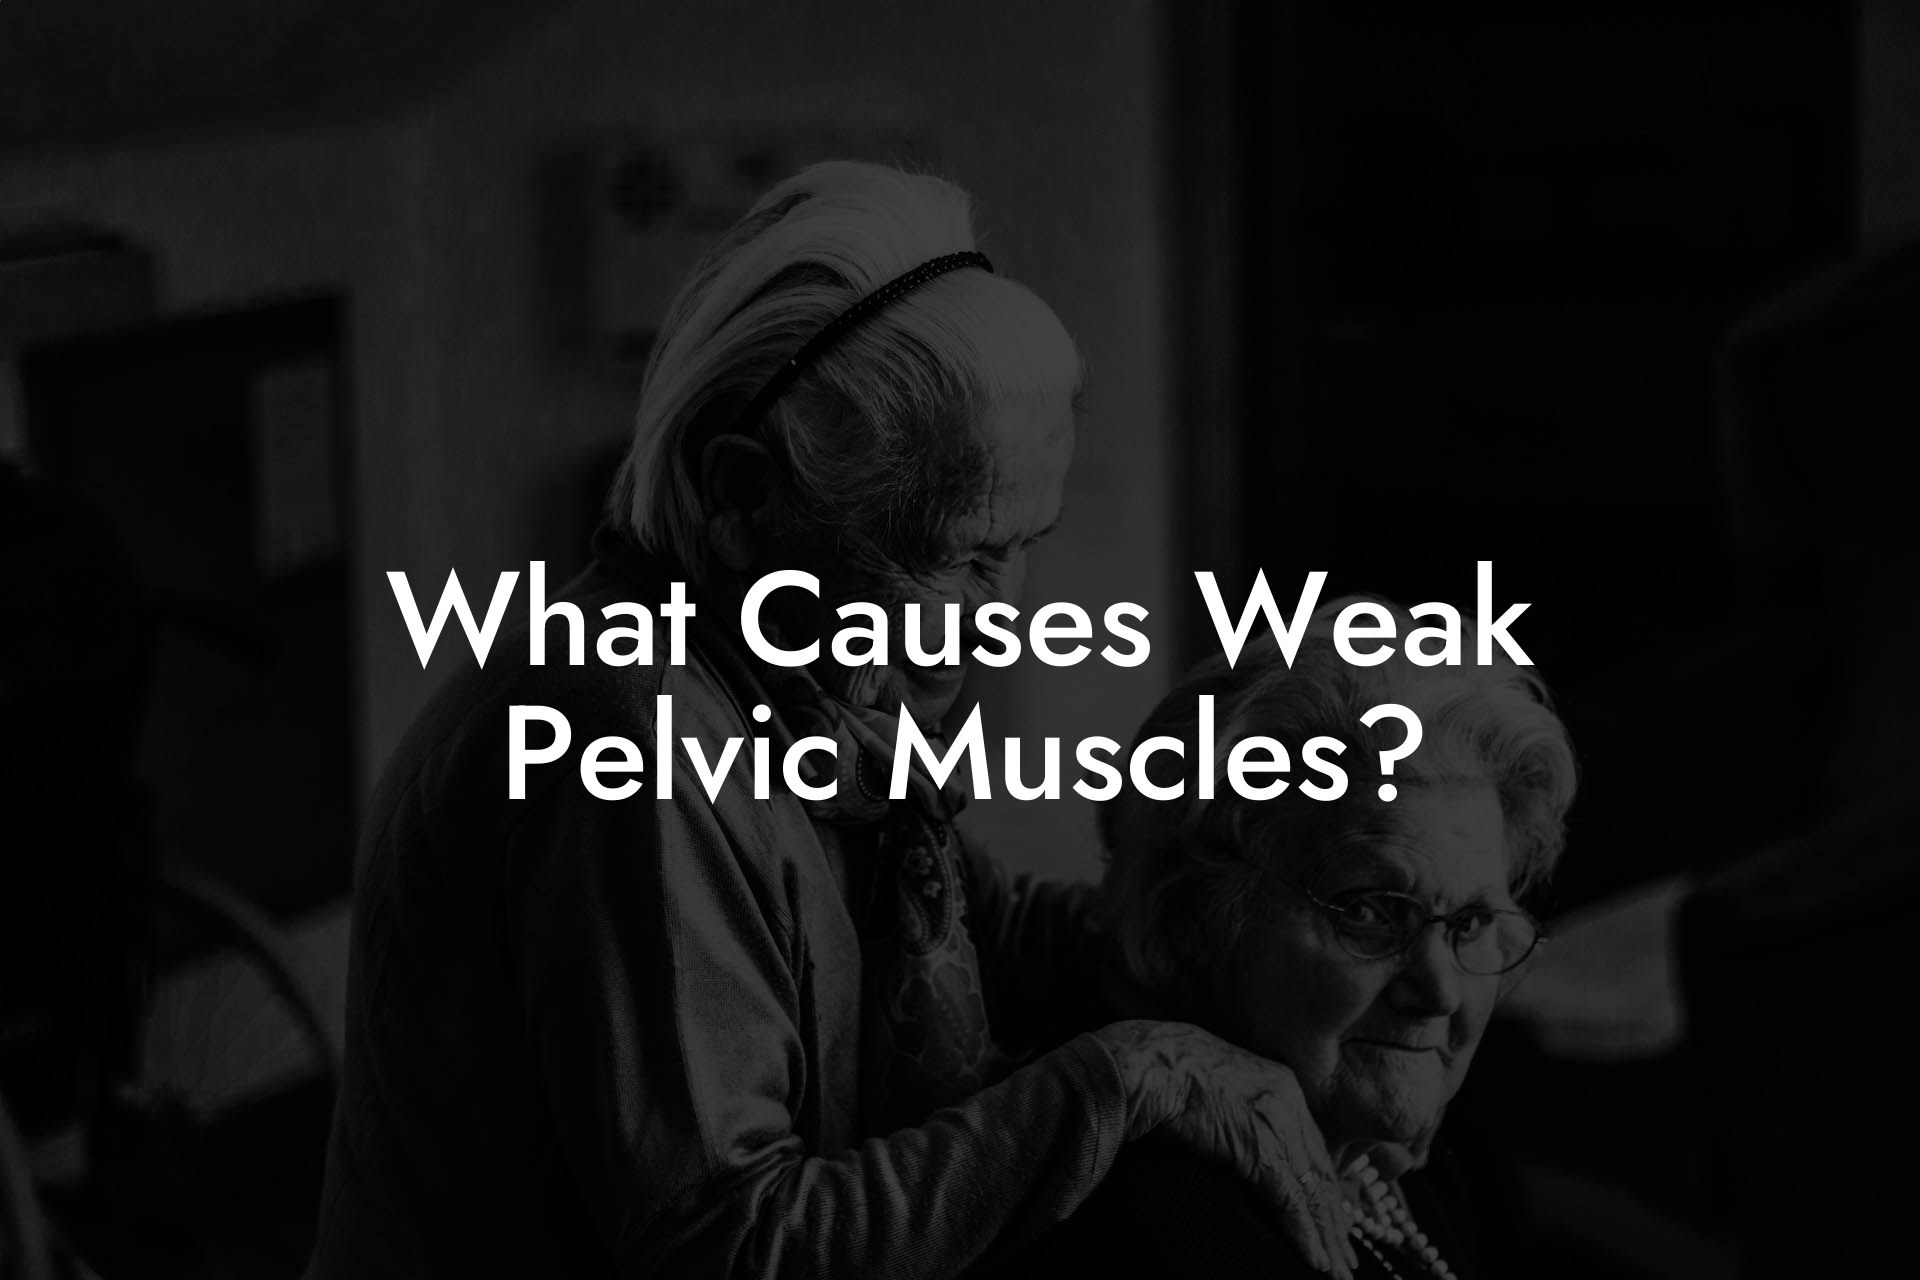 What Causes Weak Pelvic Muscles?